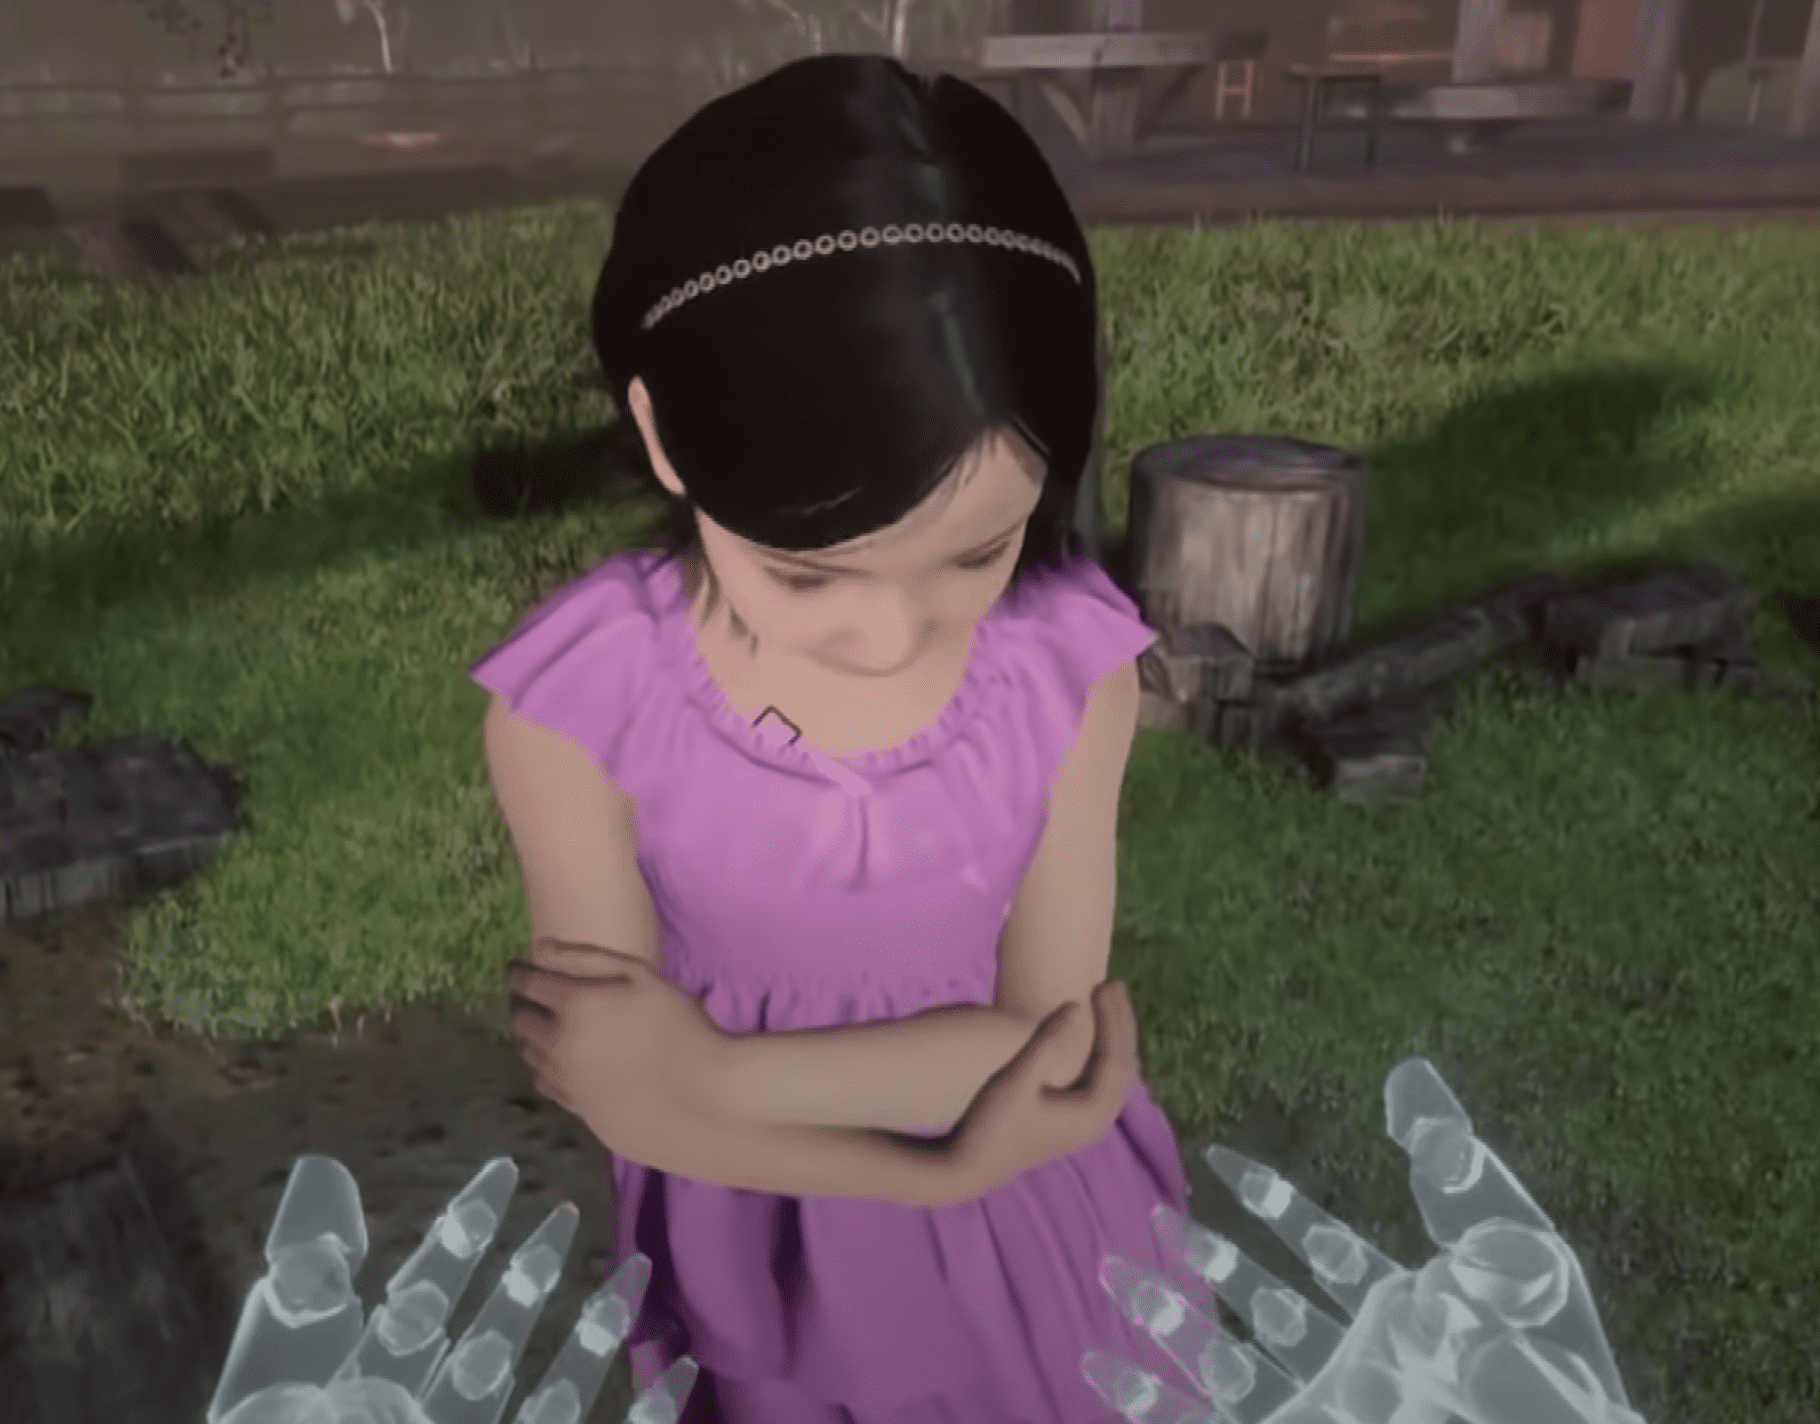 A mother reaches for her deceased daughter via virtual reality | Photo: Youtube/MBClife